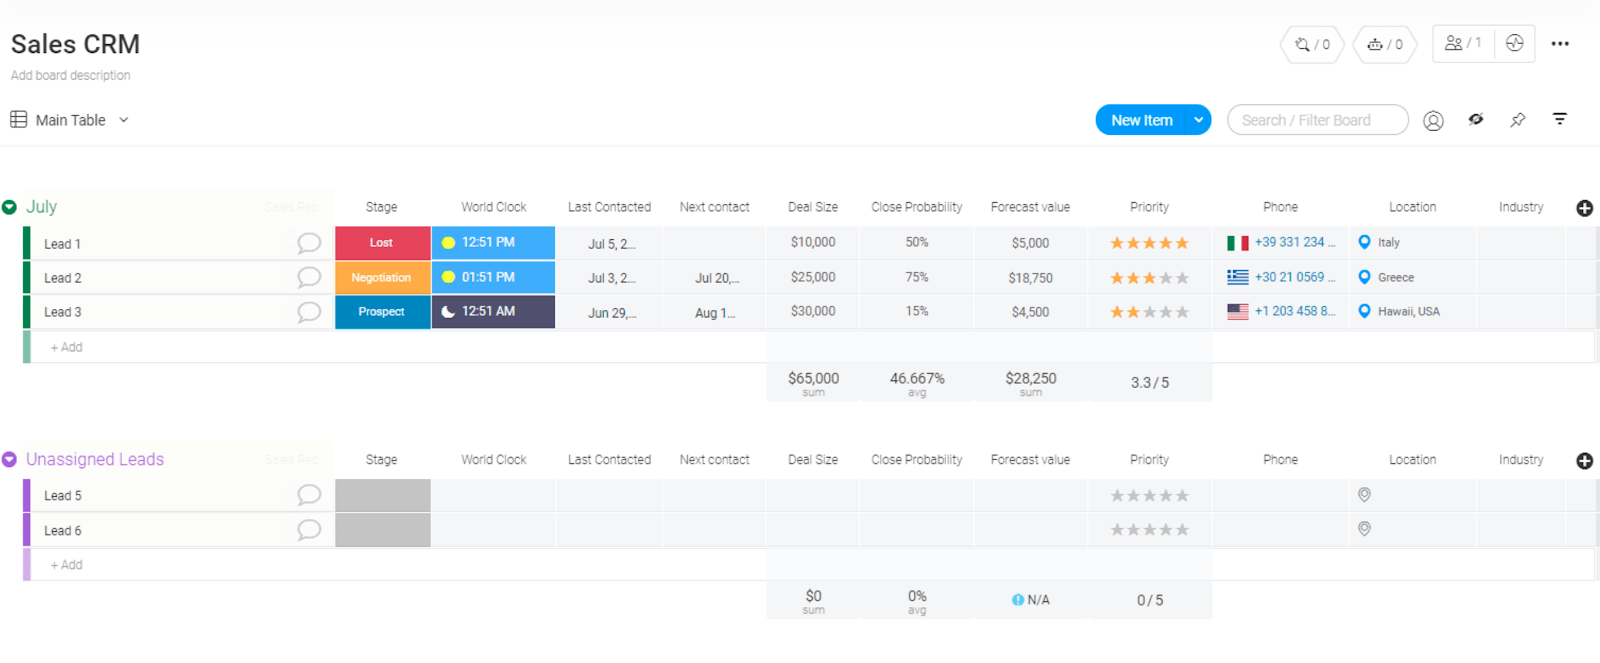 monday sales crm template example